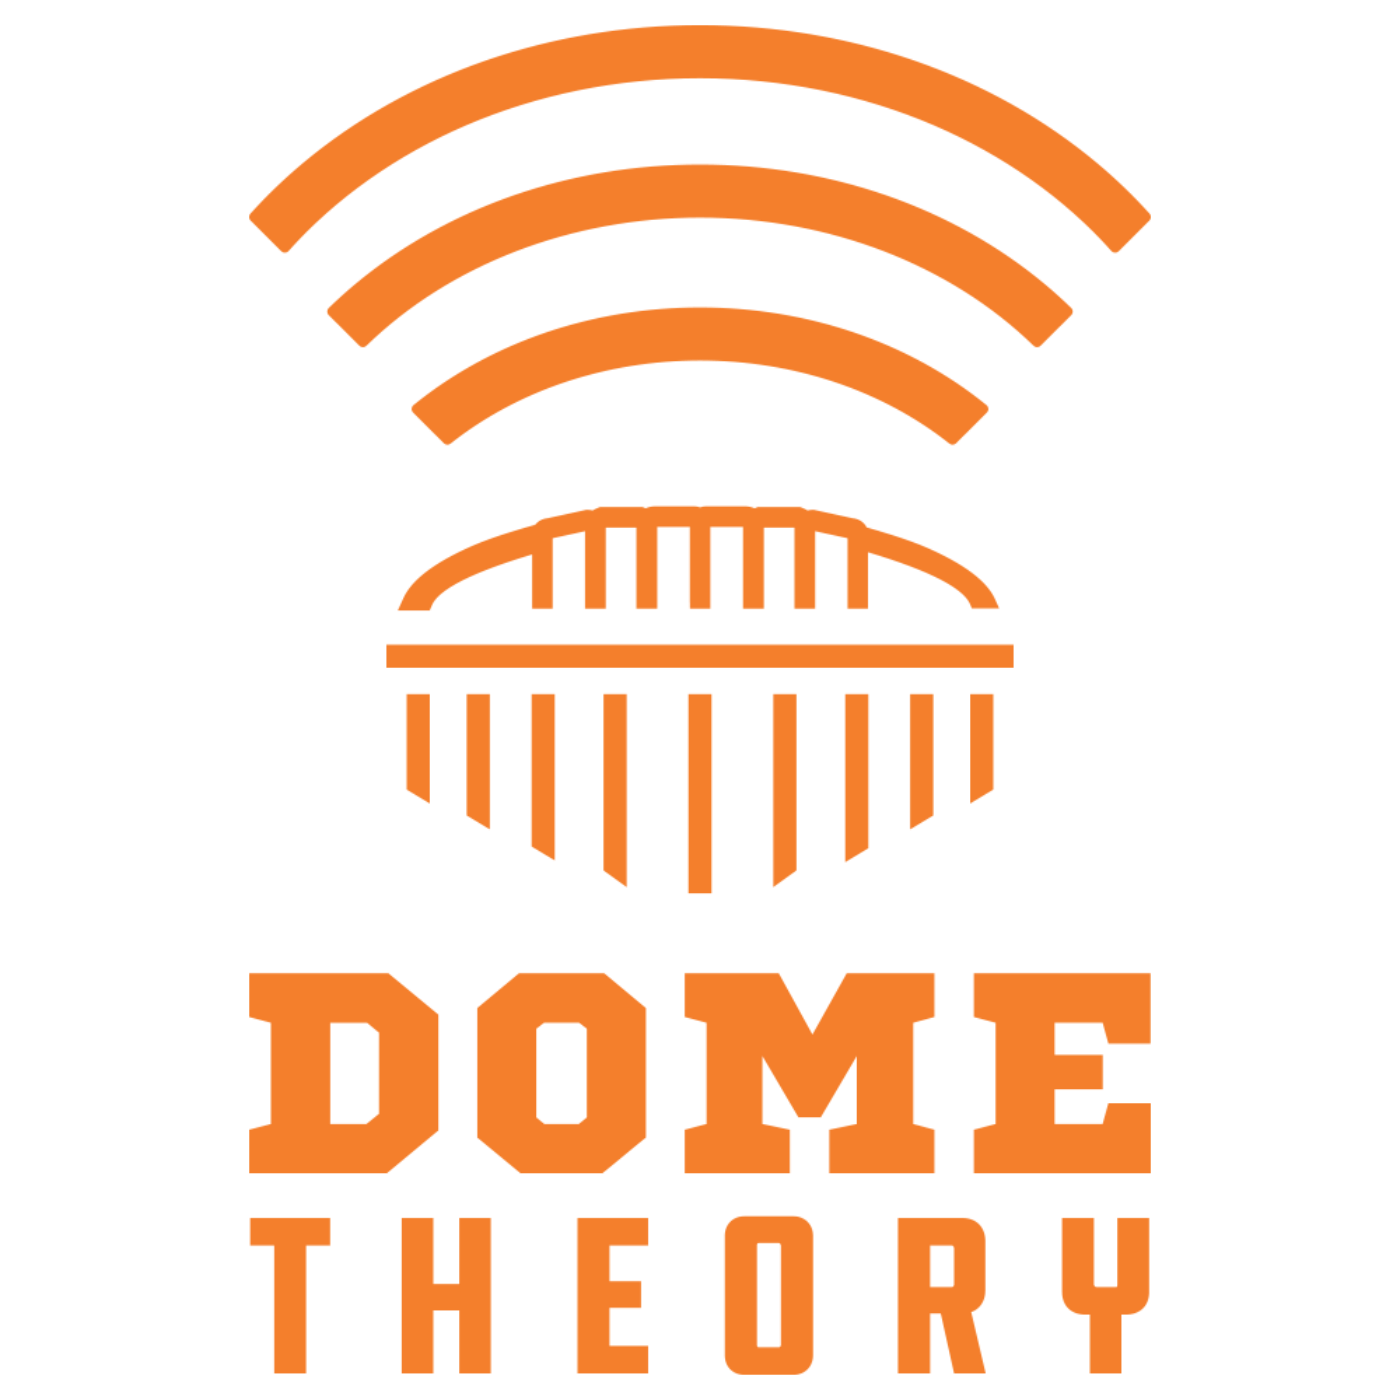 Dome Theory Sports and Culture